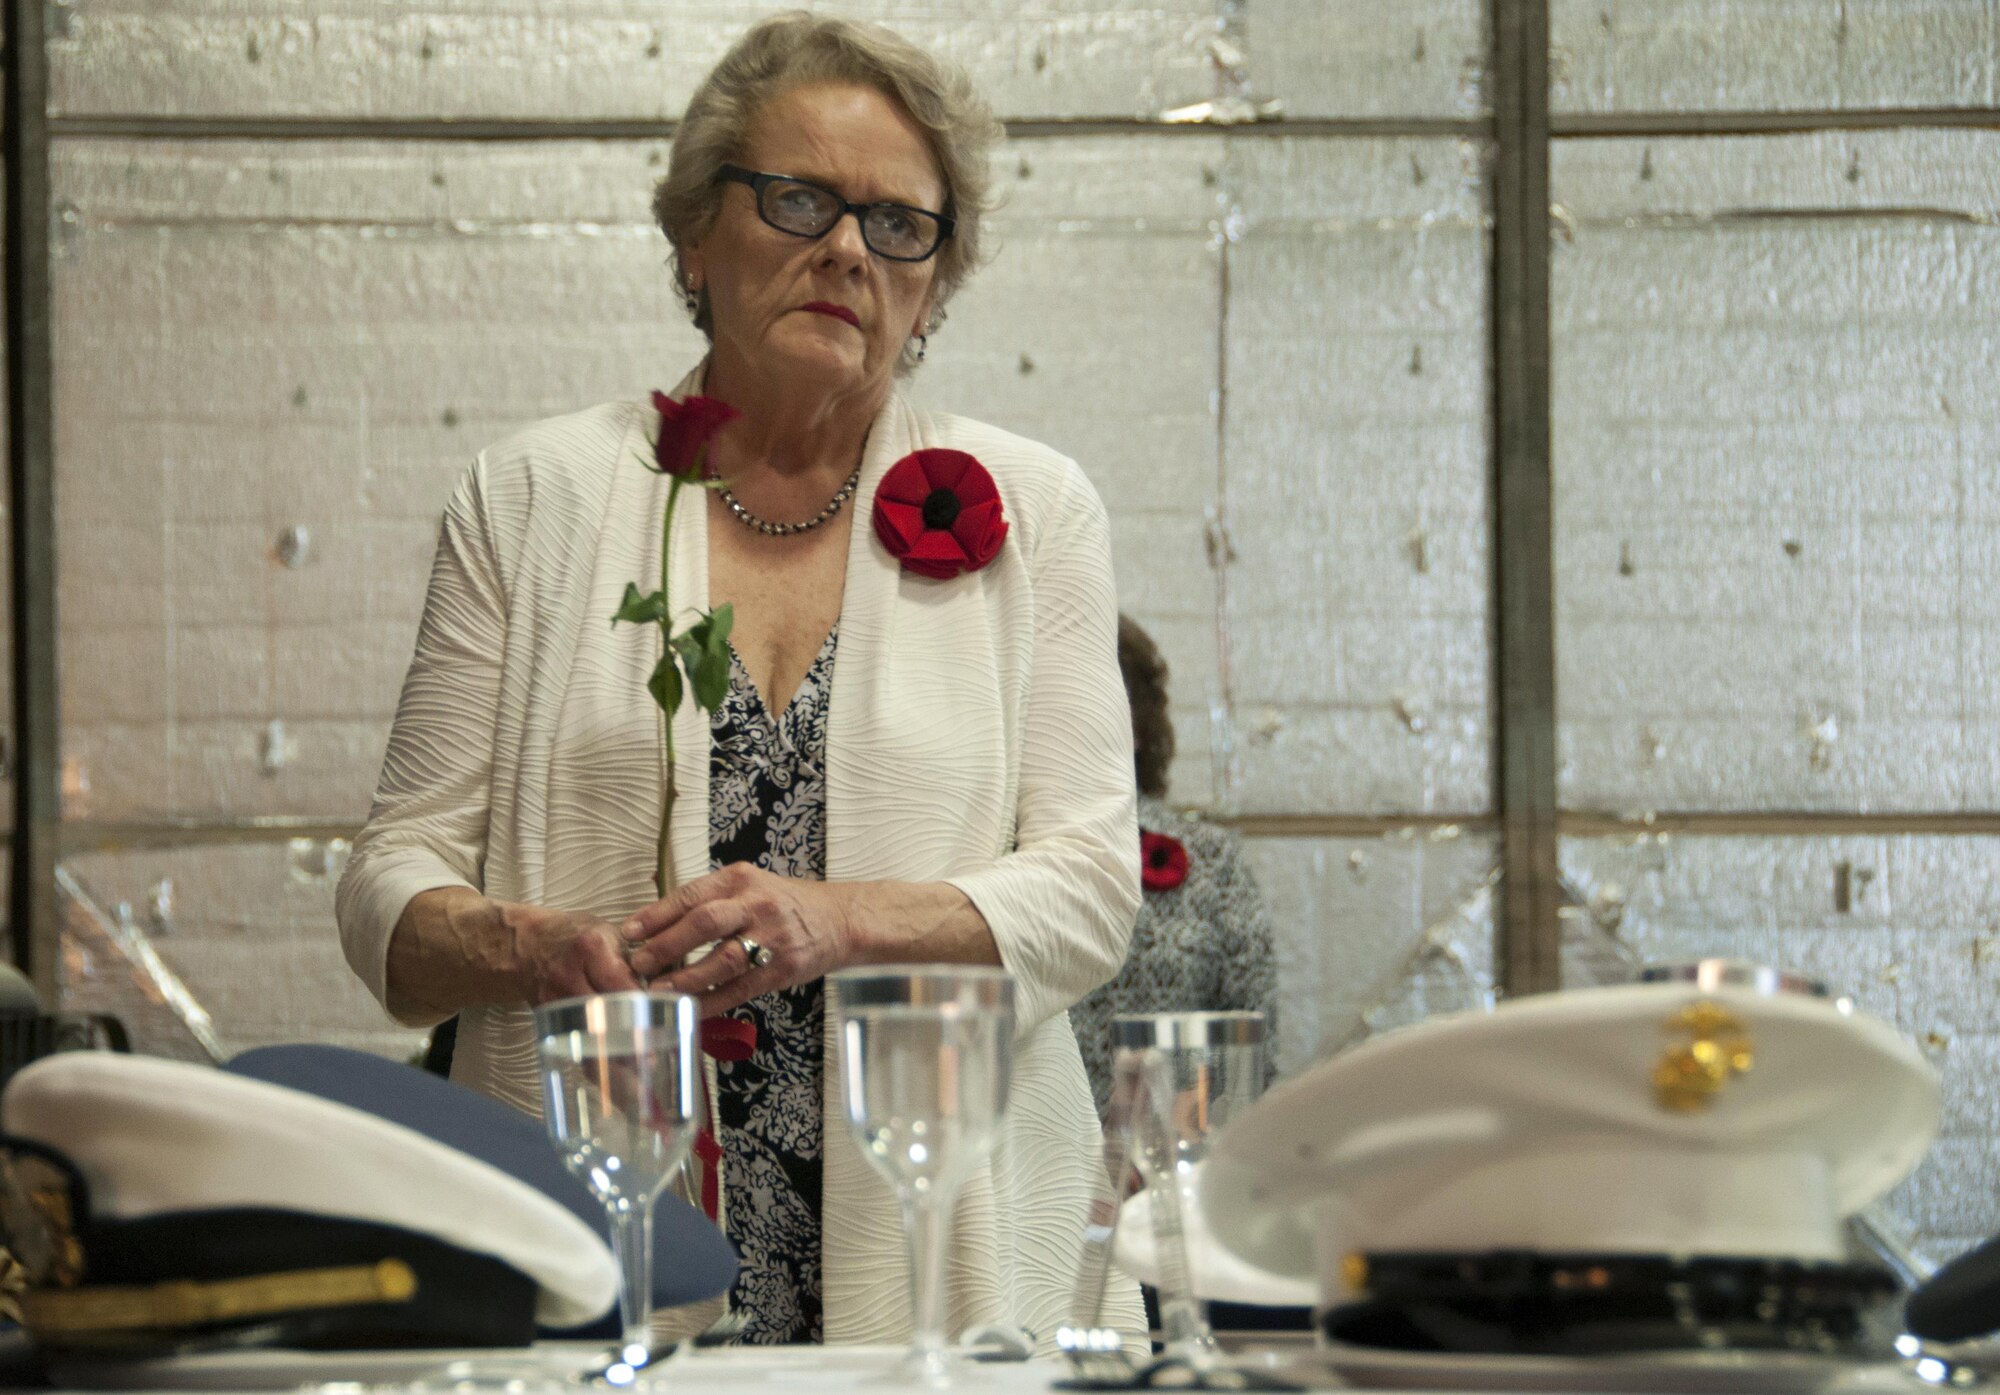 A member of the American Legion Auxillary 626 approaches a table set for those who never came home from war with a red rose, during the Vietnam War Veterans Recognition Ceremony at Naval Air Station Fort Worth Joint Reserve Base, Texas, April 22. The flower serves as a reminder of service members who are or were missing and those who are still waiting and seeking answers. (U.S. Air Force photo by Staff Sgt. Melissa Harvey)